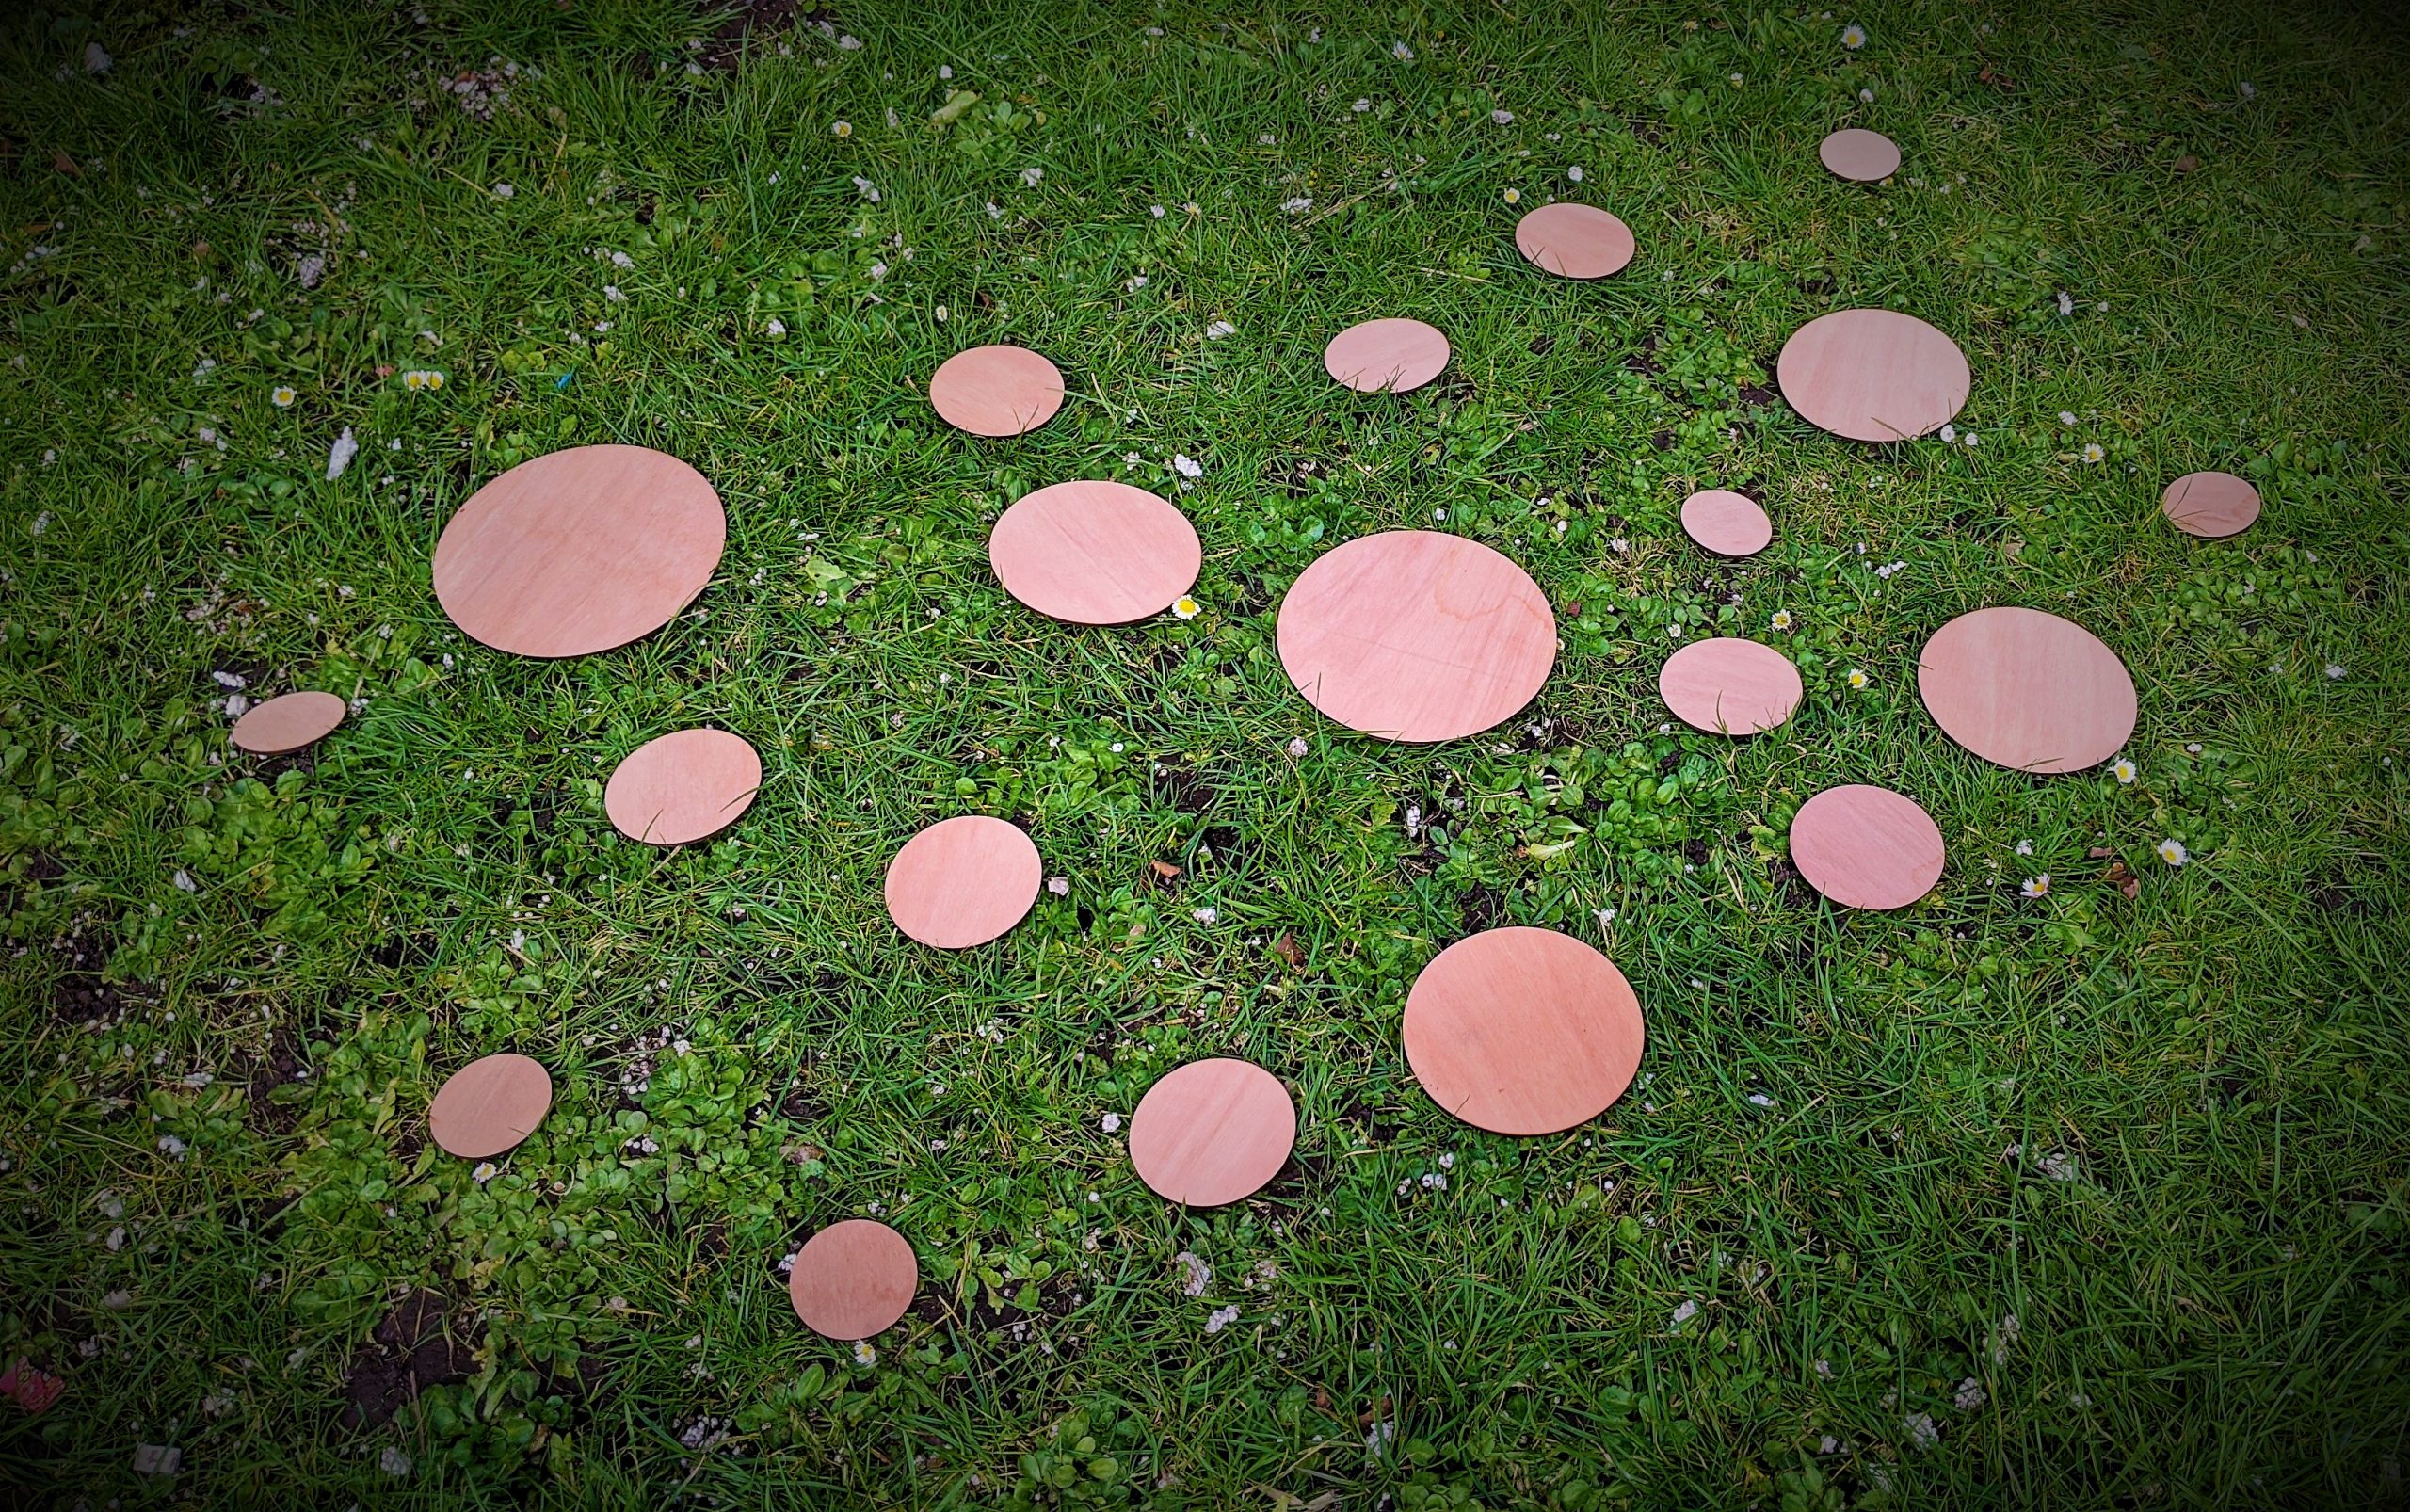 Image of 20 wooden discs on grass